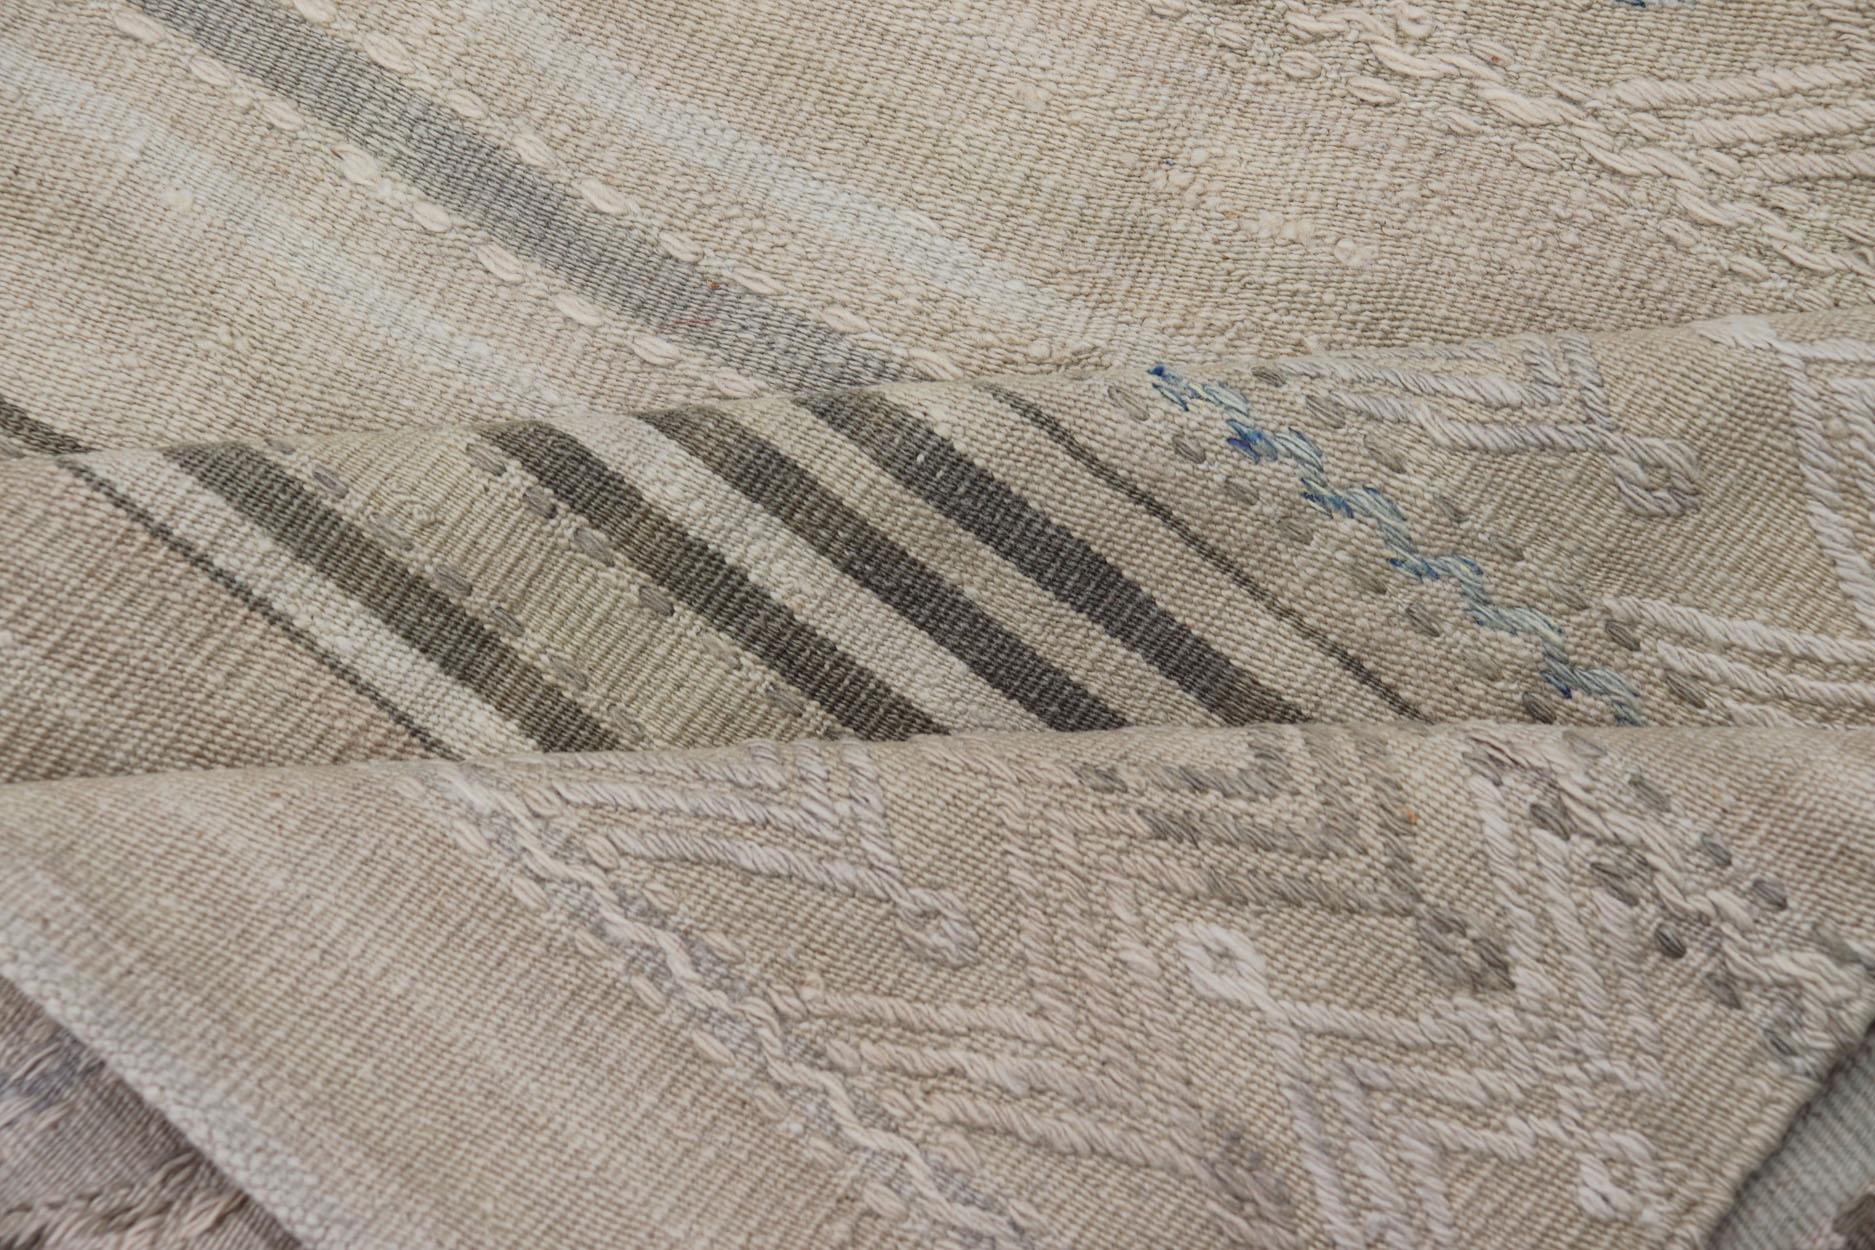 Turkish Flat-Weave Kilim with Tribal Embroideries in Taupe, Tan, Blue-Gray Color For Sale 1